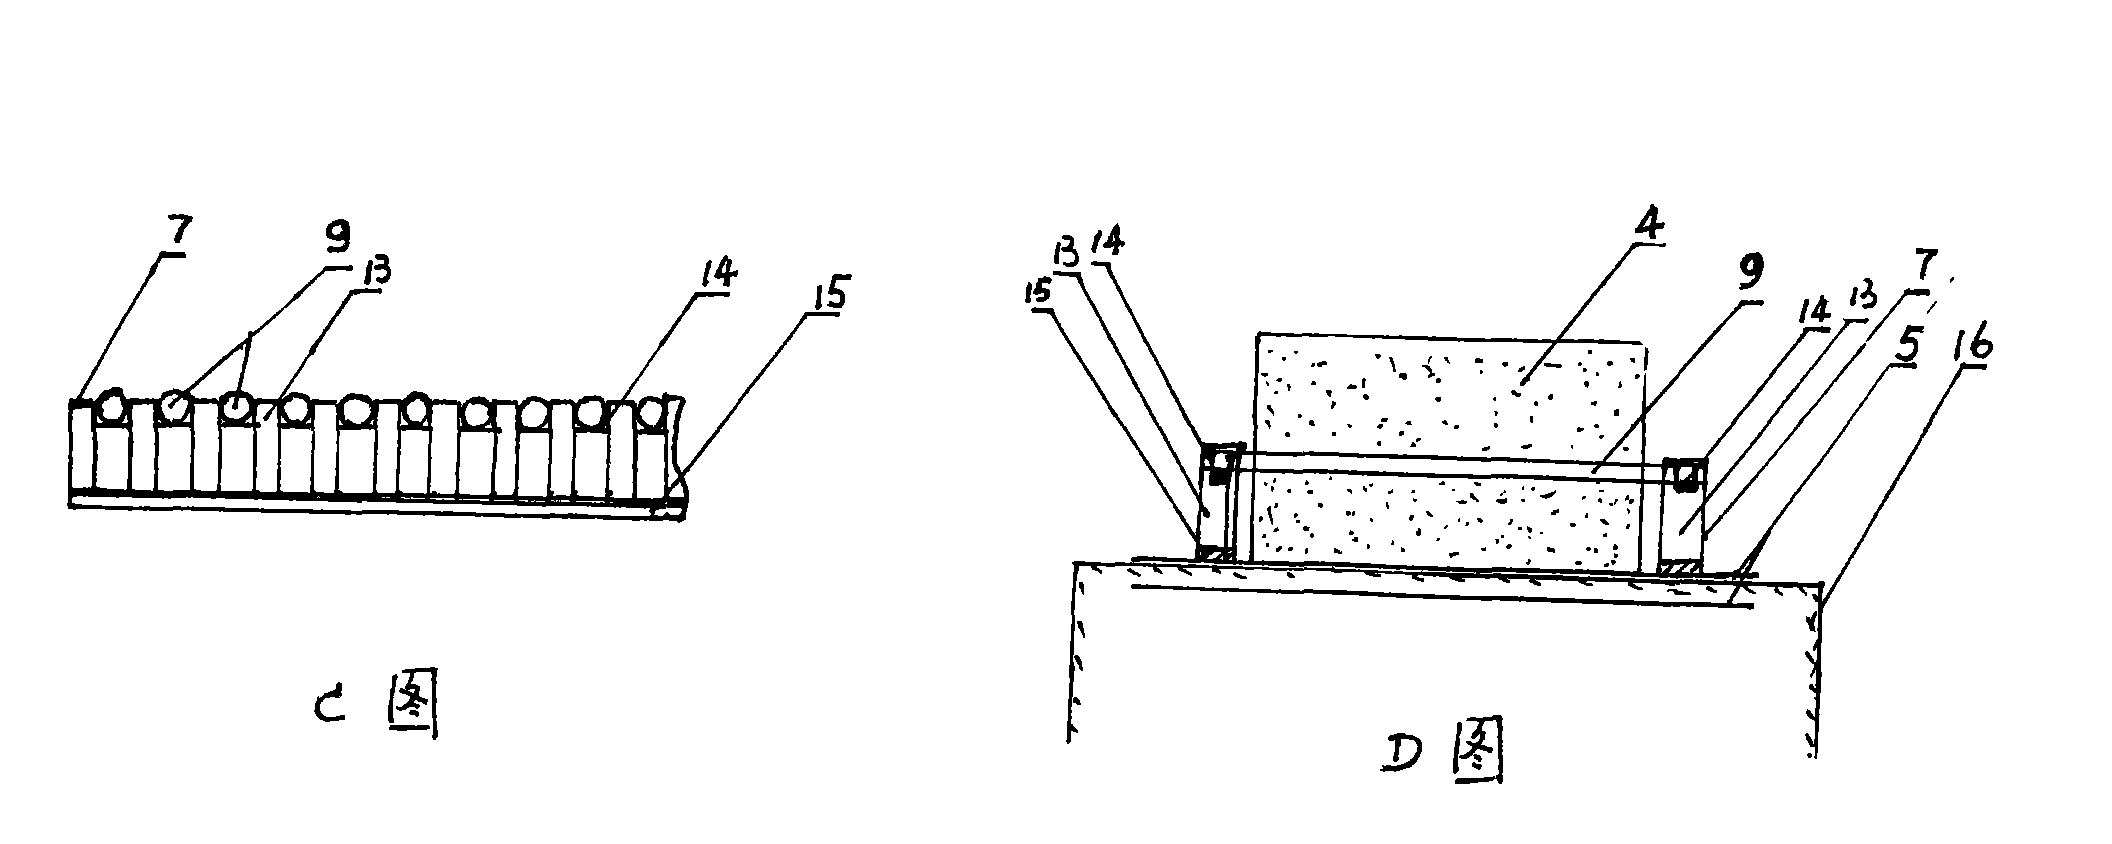 Method for manufacturing hollow medium density fiberboards and special equipment